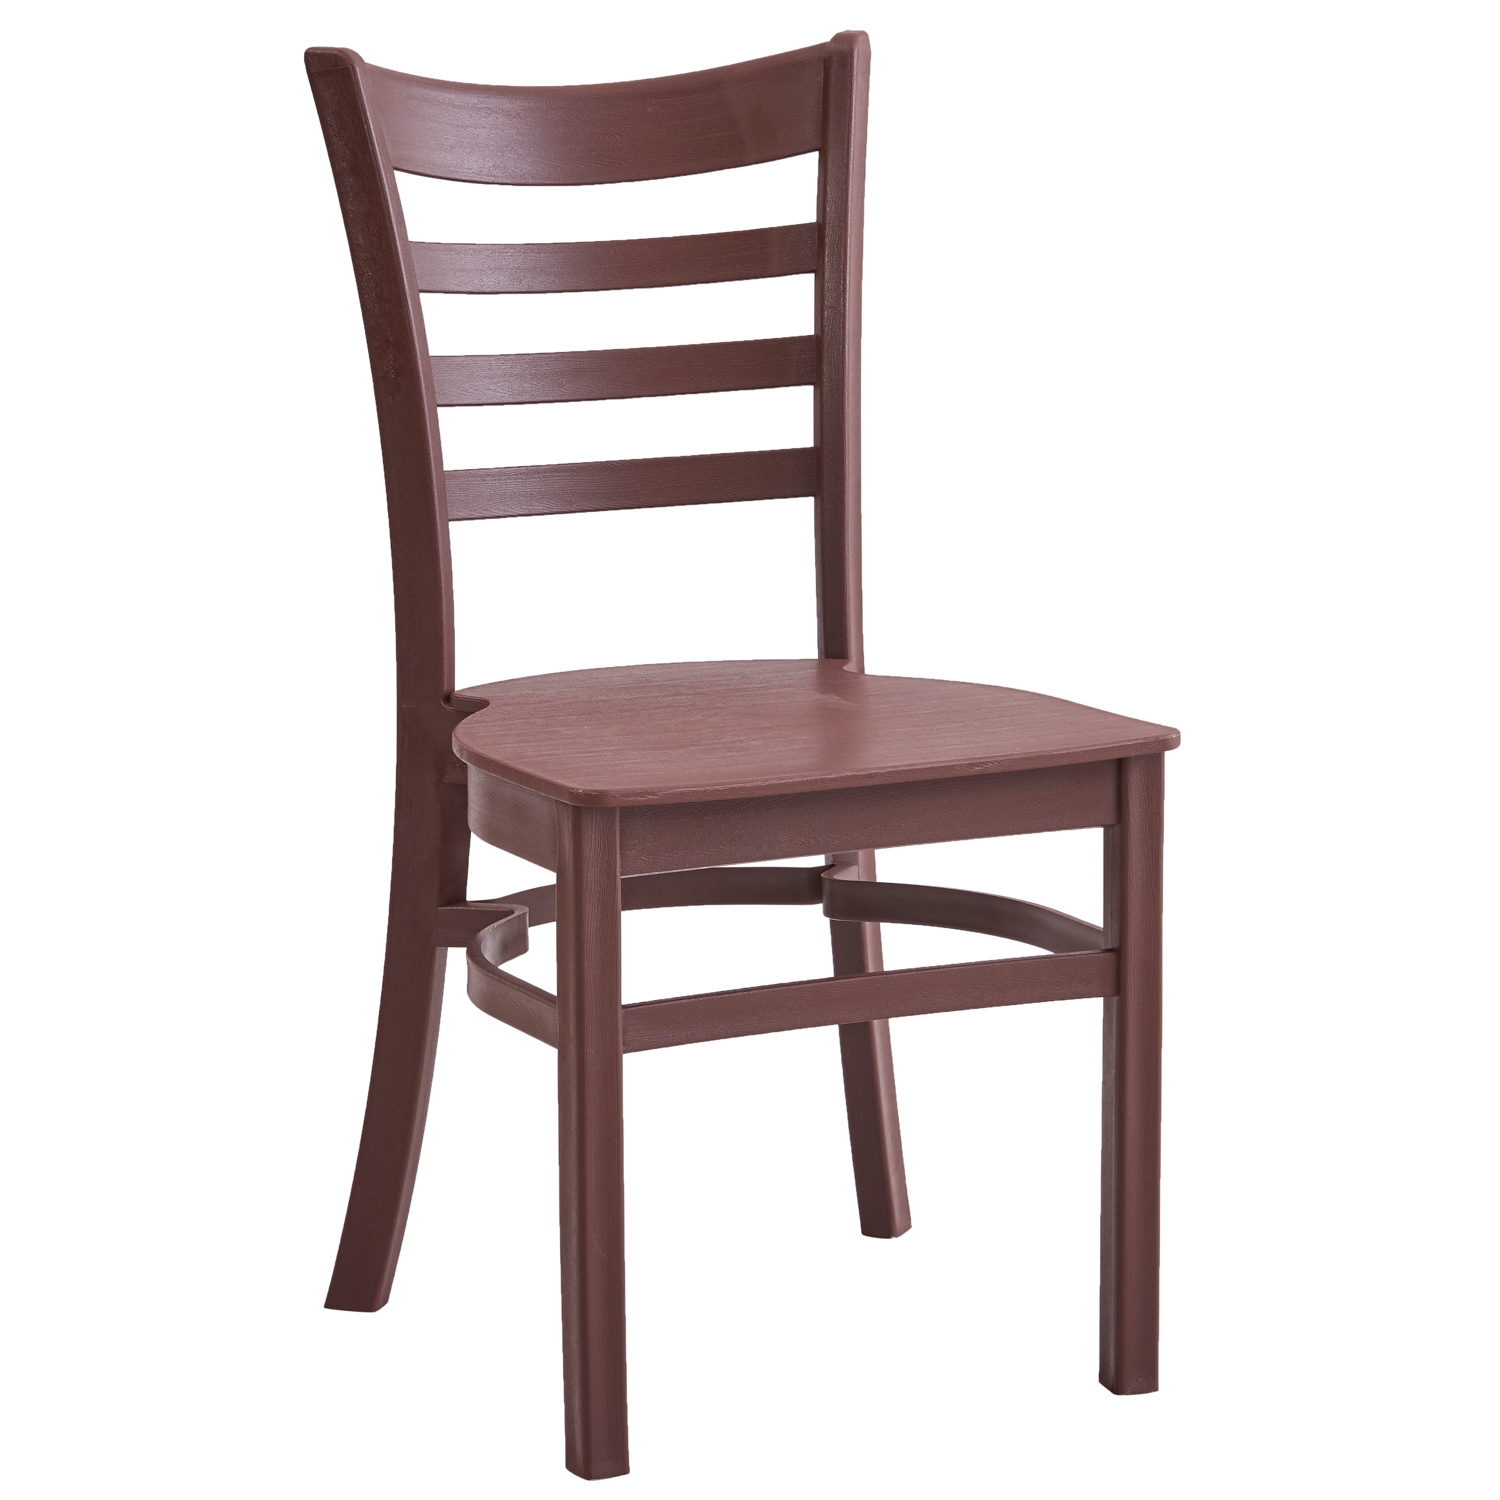 All-Weather Ladder Back Chair - Java